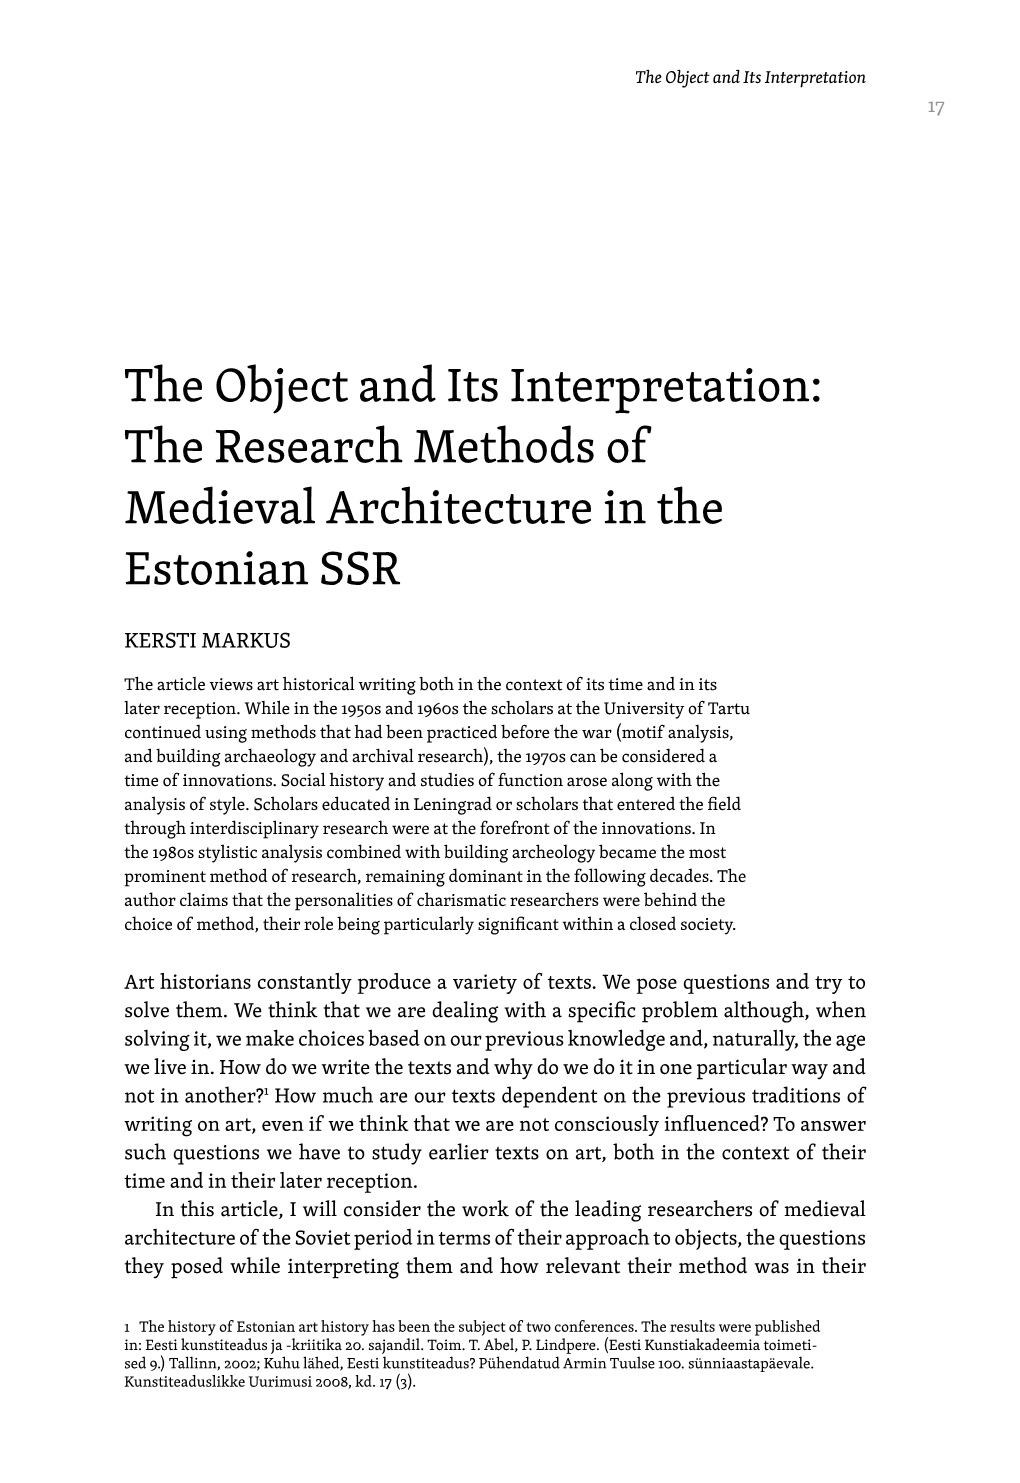 The Research Methods of Medieval Architecture in the Estonian SSR